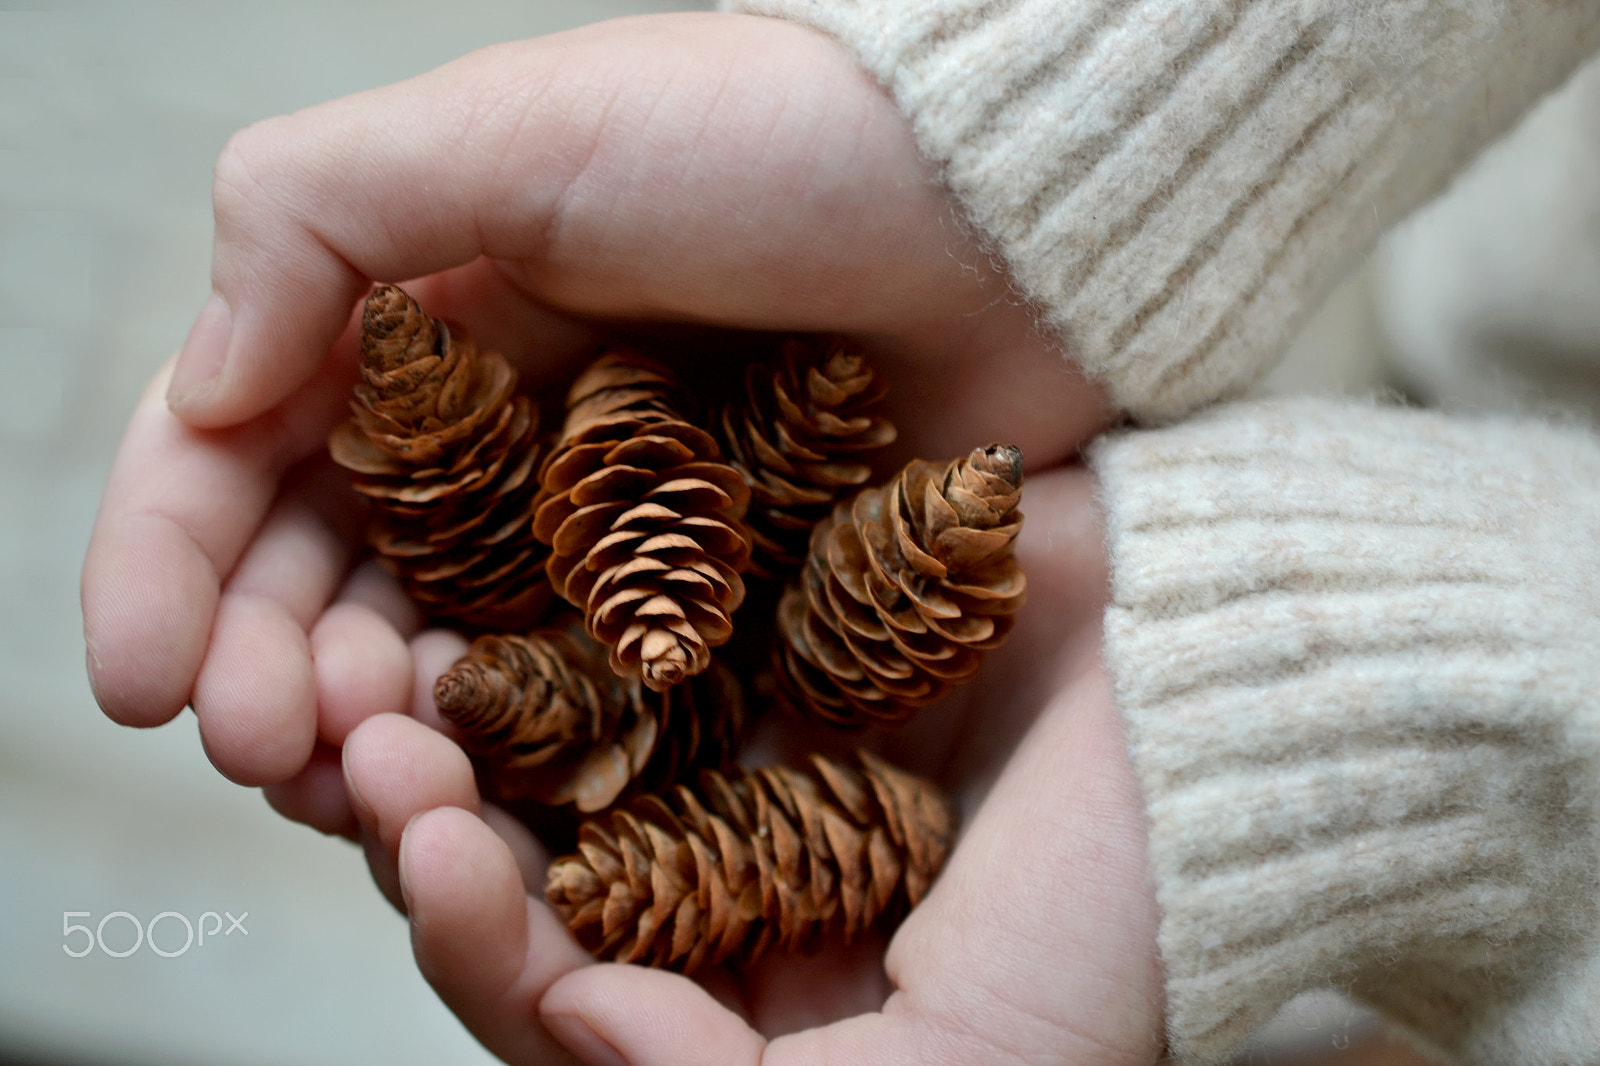 Nikon D3100 sample photo. Pinecones in girls hands with beige sweater photography